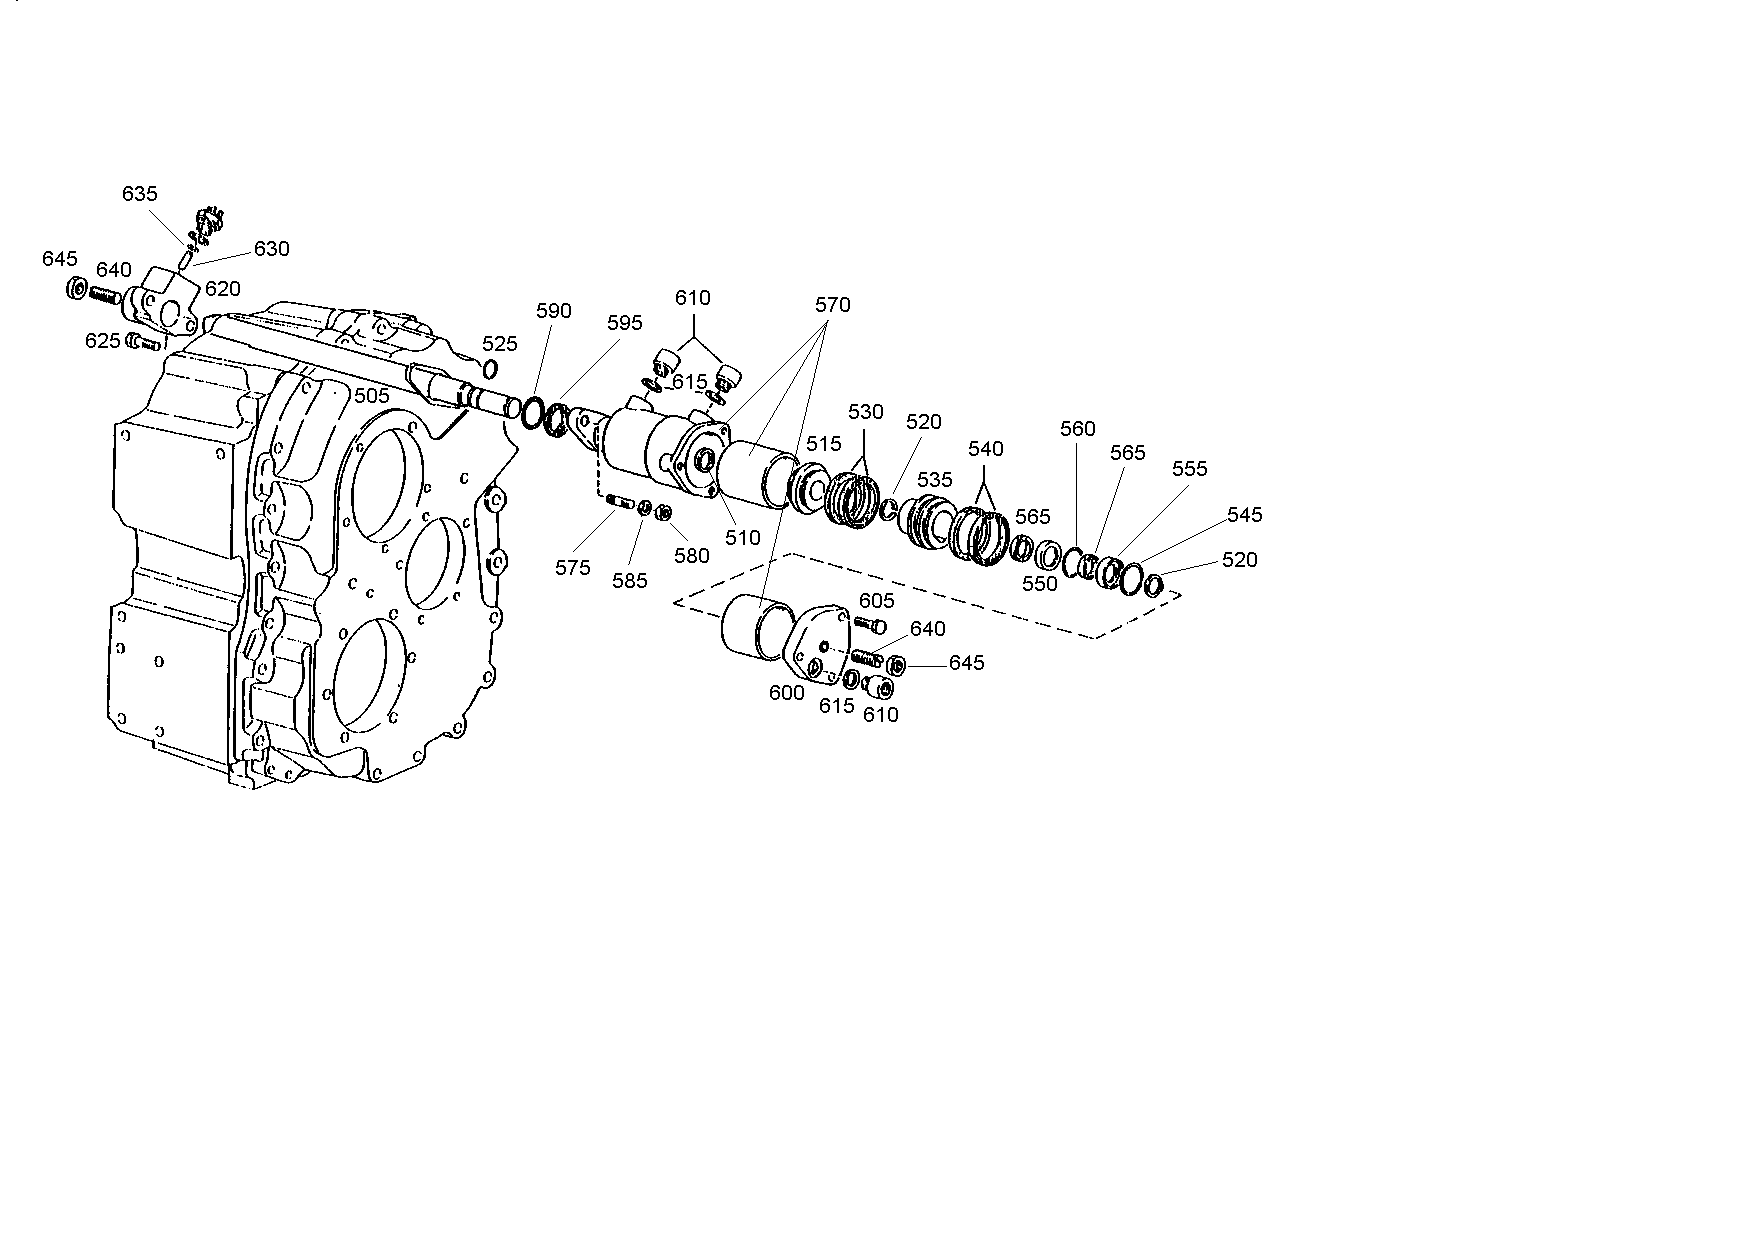 drawing for MARMON Herring MVG121082 - OUTPUT SHAFT (figure 3)